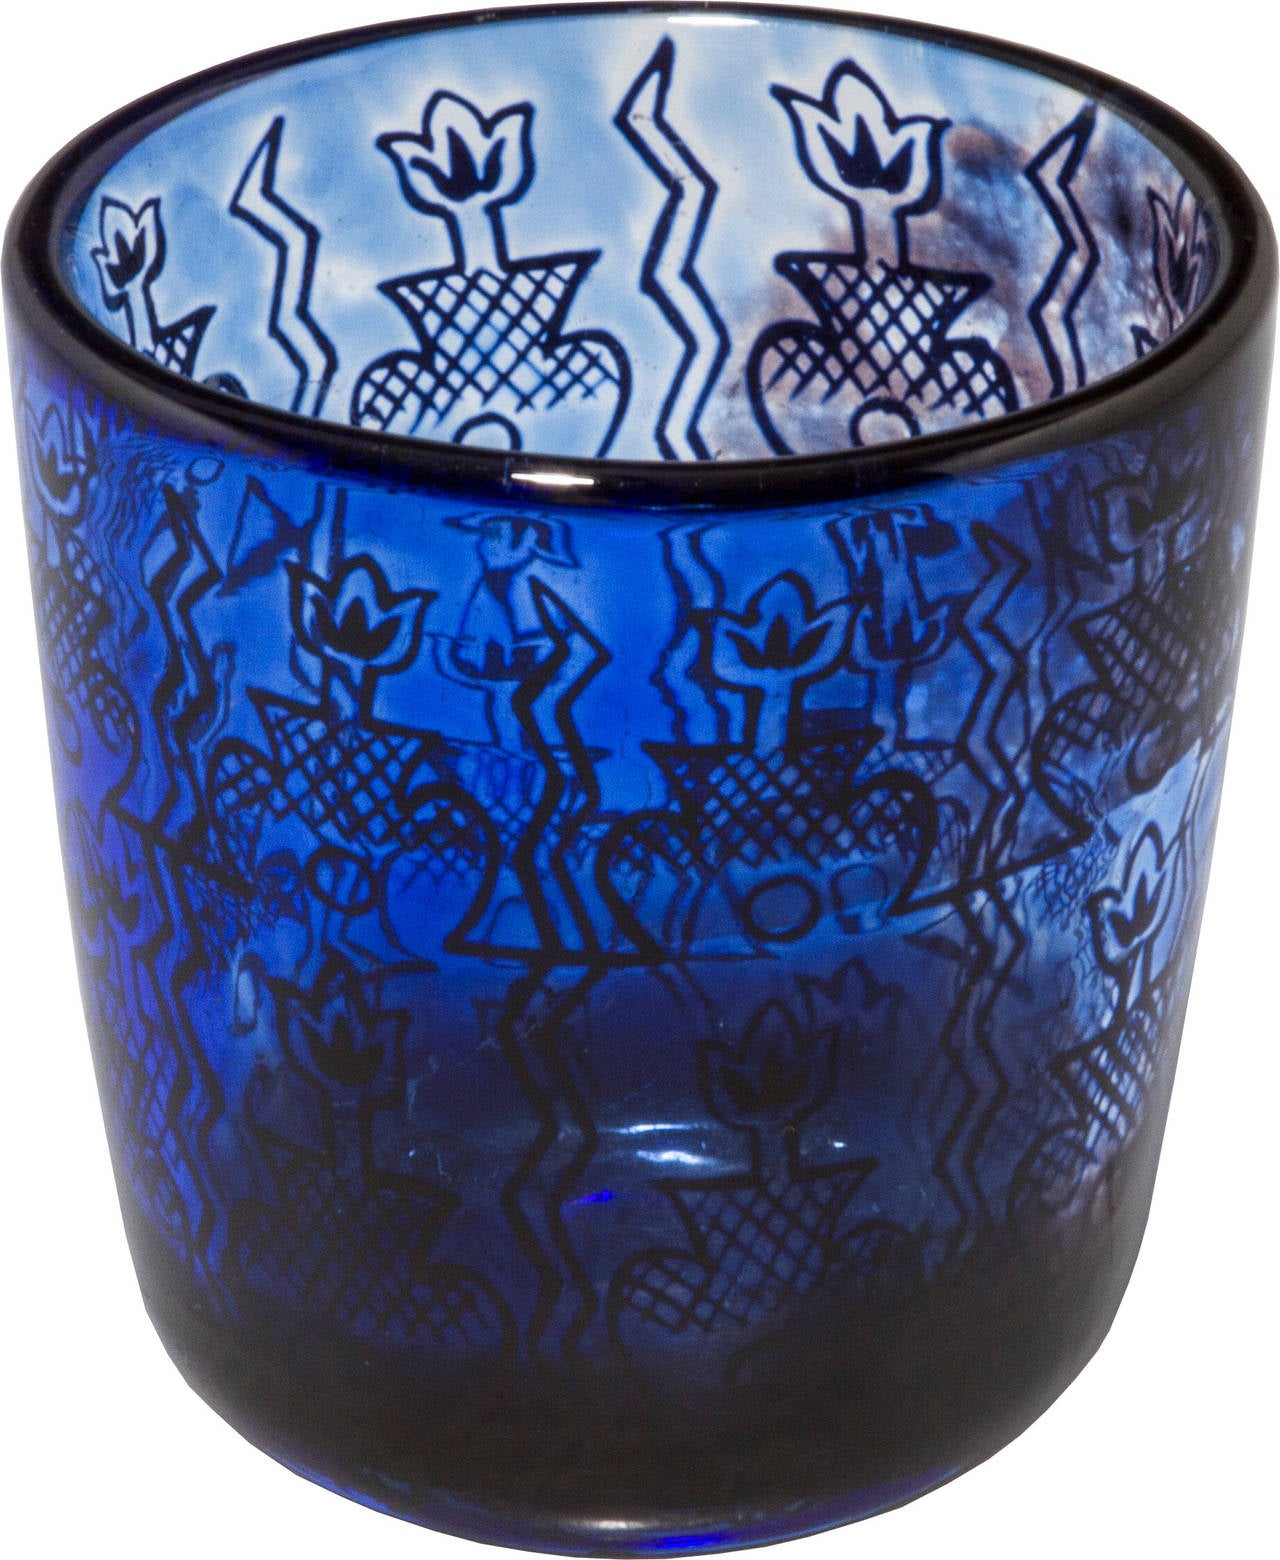 This is a beautiful small vase by Edward Hald with a overall geometric floriform pattern. This early piece is dated 1940.